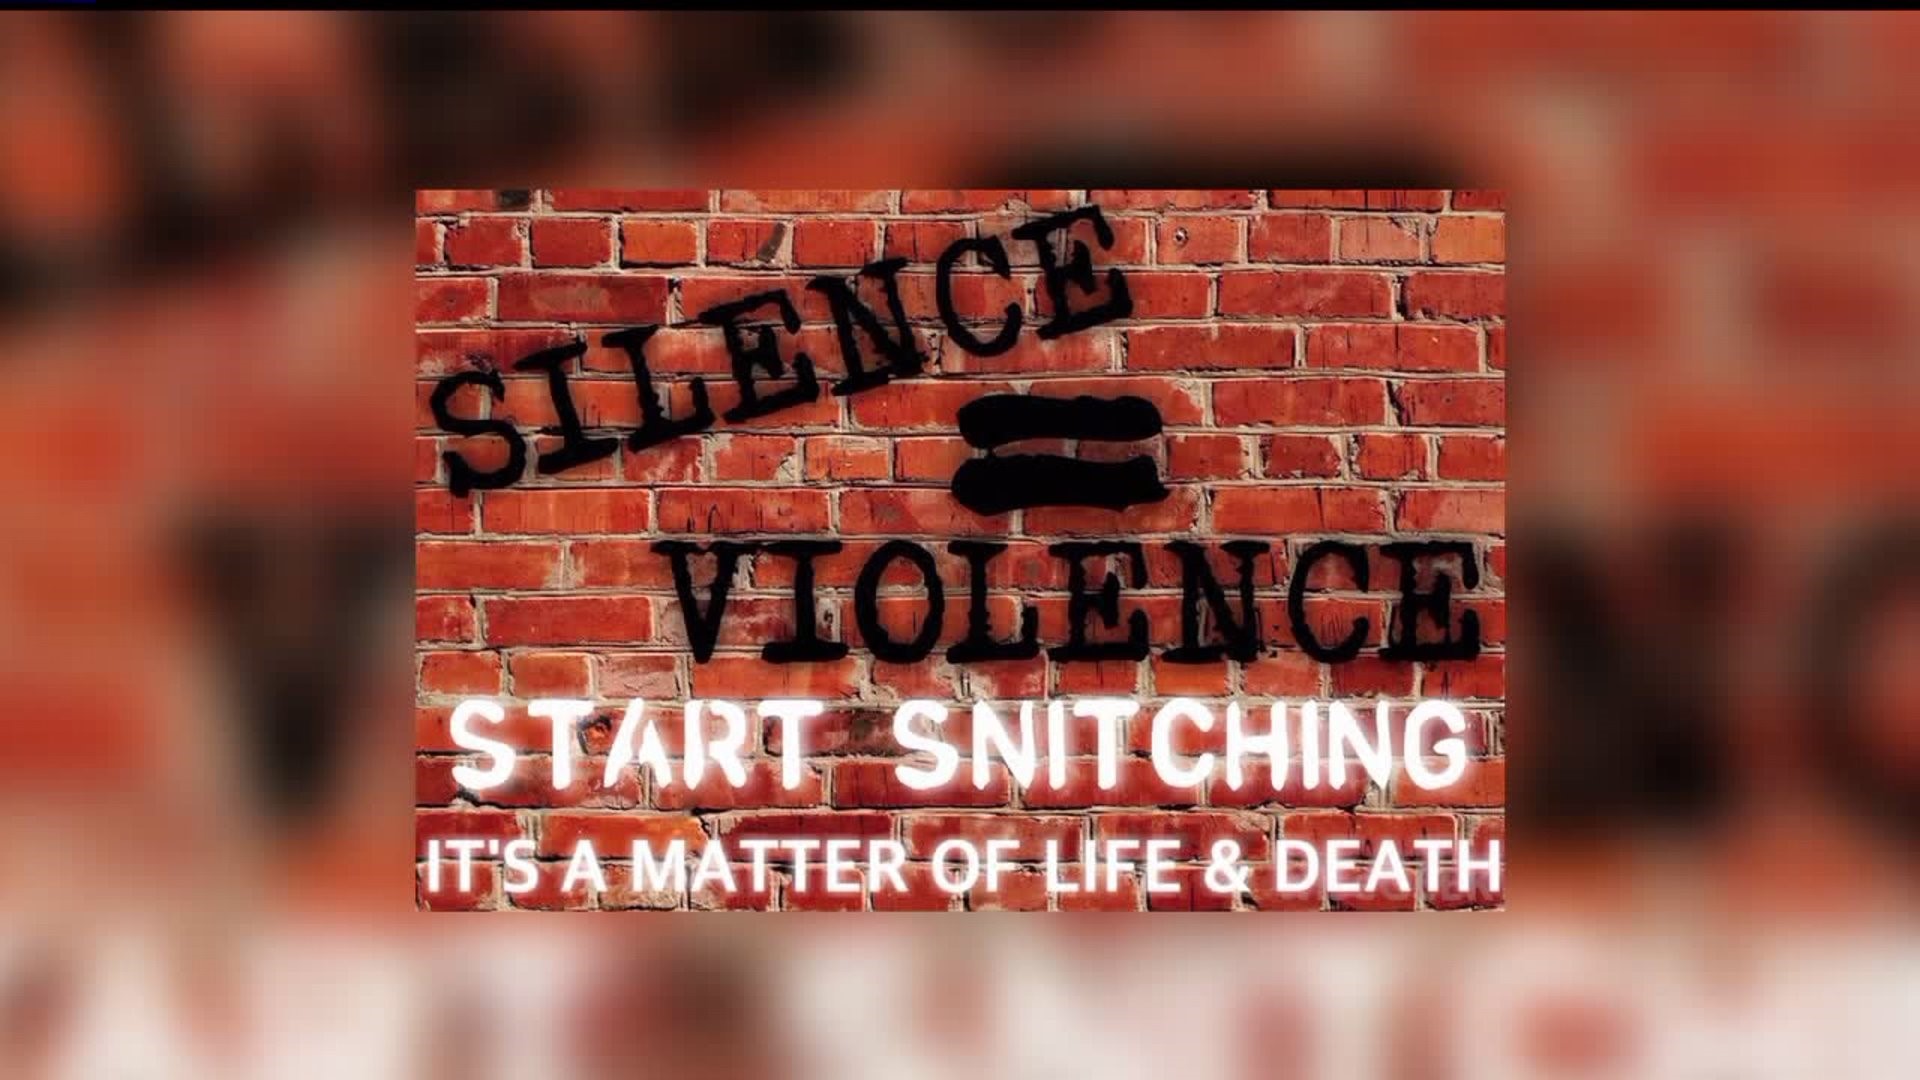 Community leader creates poster for York: "Silence equals violence. Start snitching."